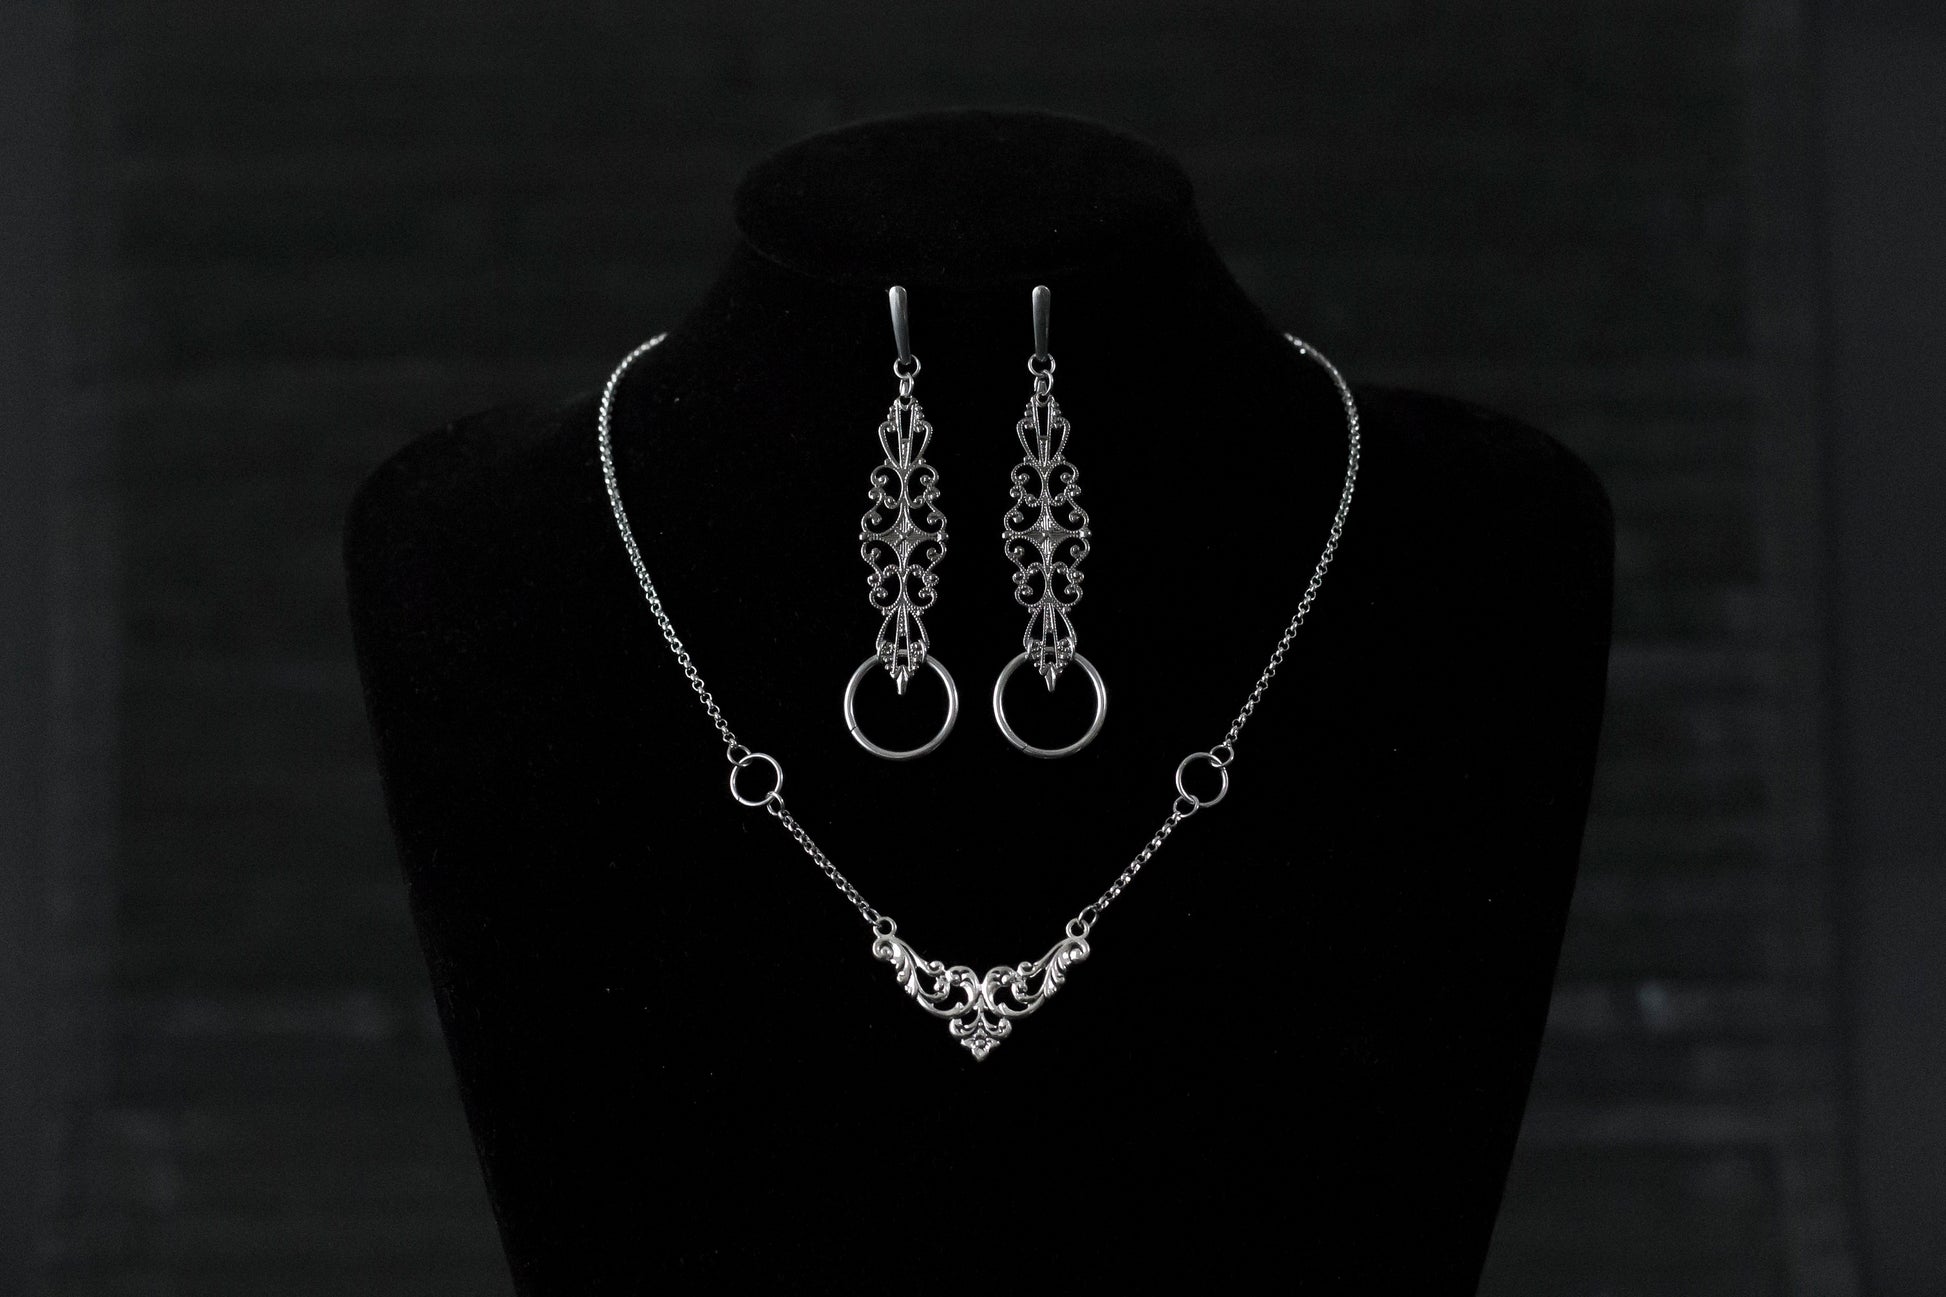 Displayed against a black backdrop is Myril Jewels' gothic necklace and earring set, exuding delicate elegance. The silver necklace features a central ornate design, flanked by symmetrical rings, reflecting neo-goth craftsmanship. Matching earrings with similar filigree patterns and rings complete this dark-avantgarde ensemble. Ideal for Halloween, this set aligns with the gothic-chic, whimsigoth, and witchcore trends, suited for both everyday wear and as a statement piece for rave parties or festivals.